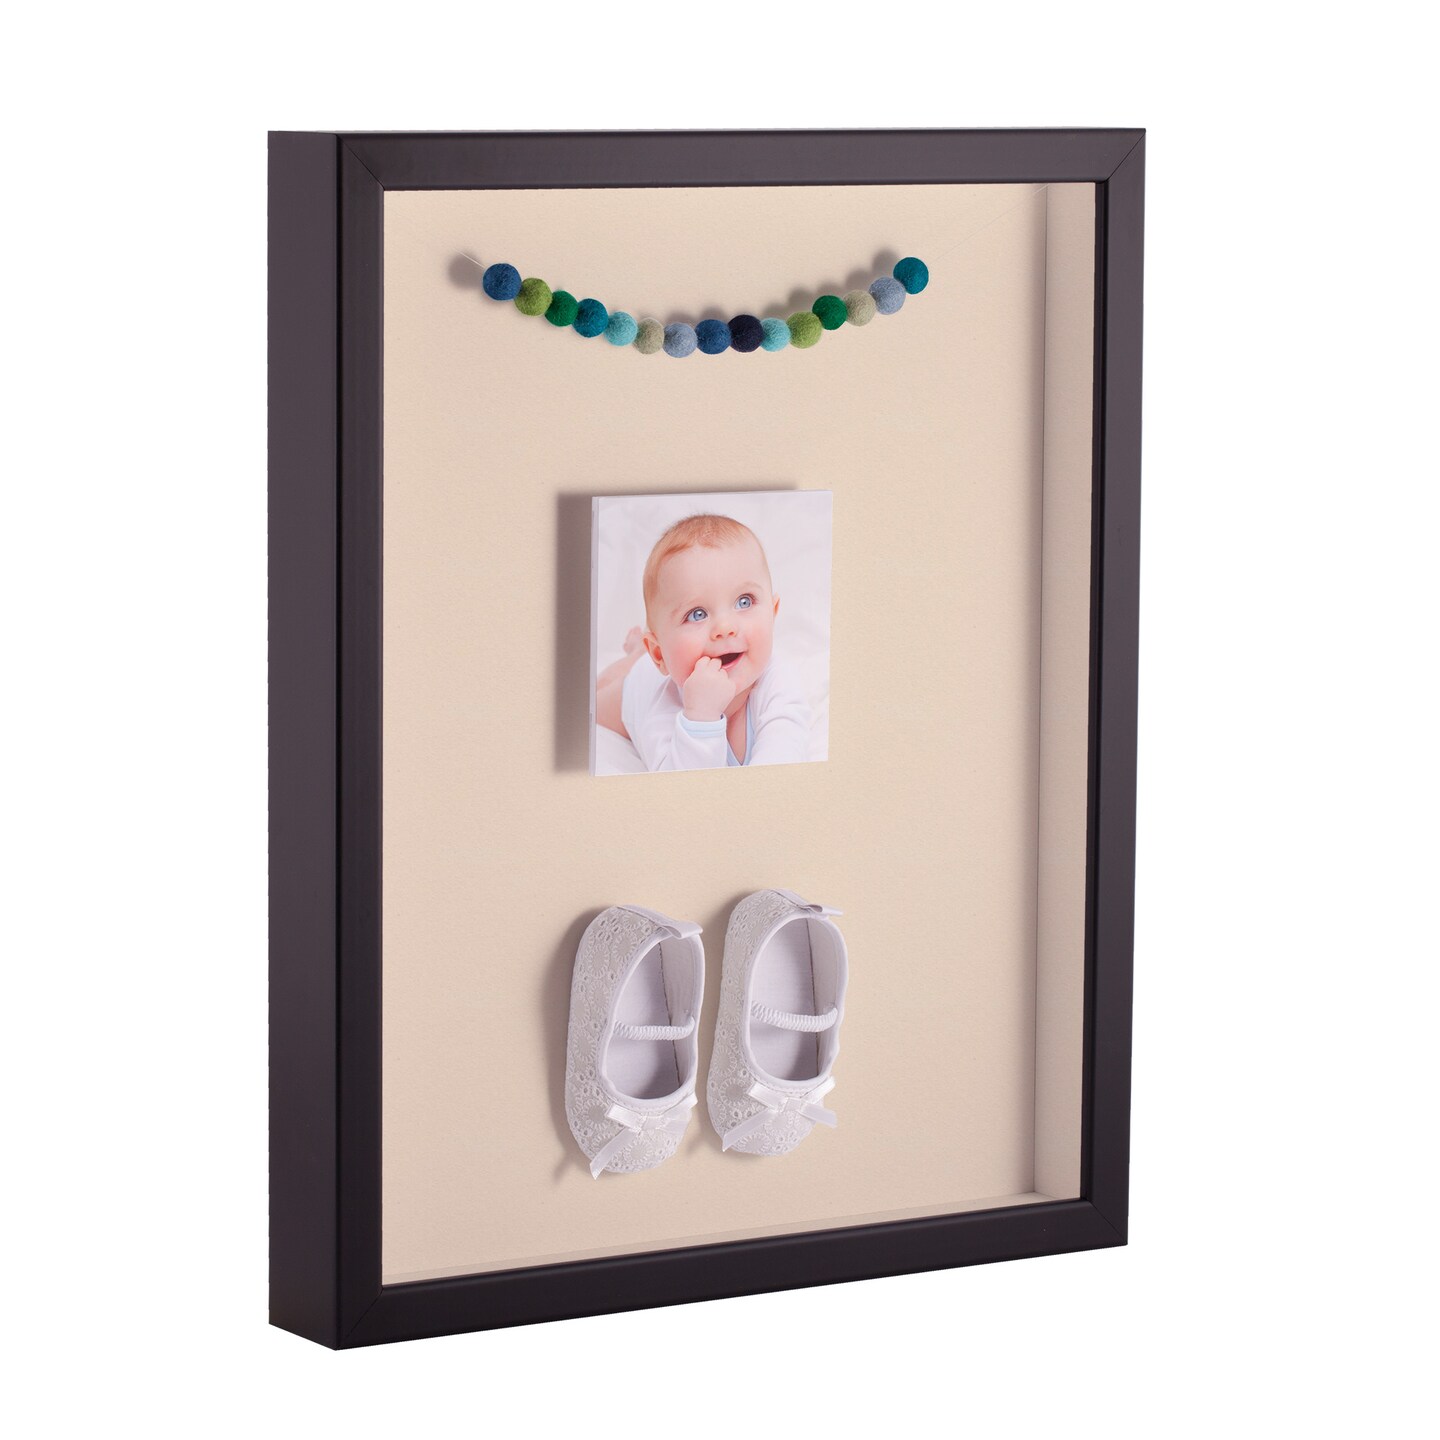 shadow box picture frame, 20x20 inches